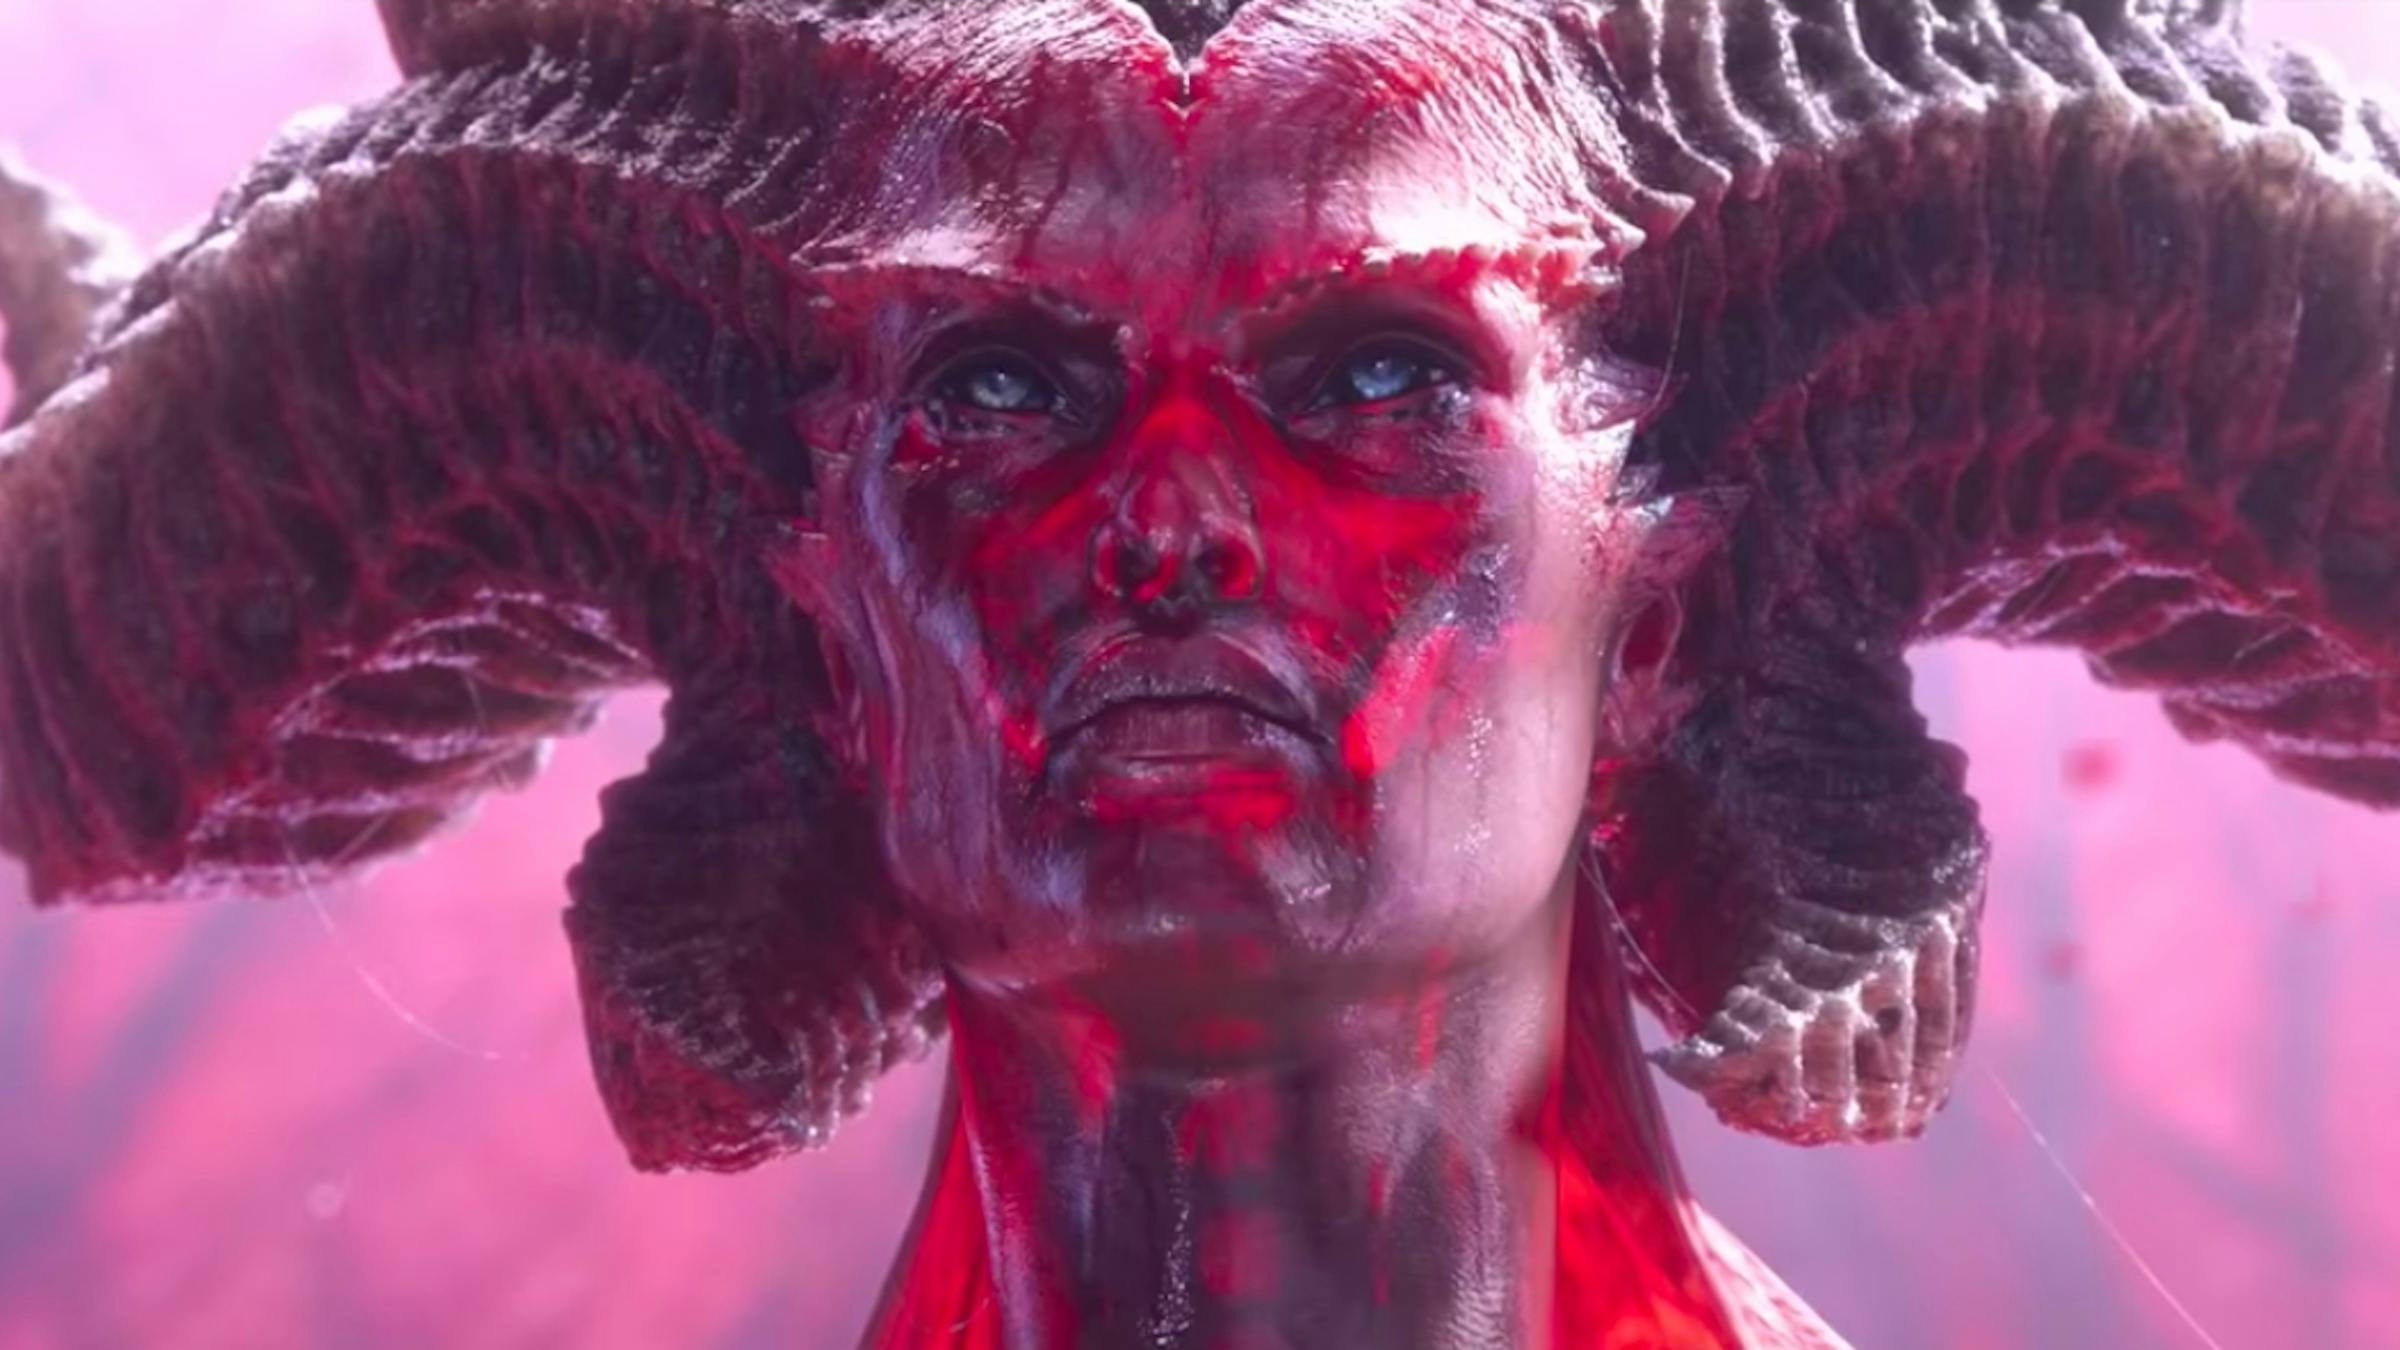 The Diablo IV Trailer Might Be The Most Metal Thing You Watch Today